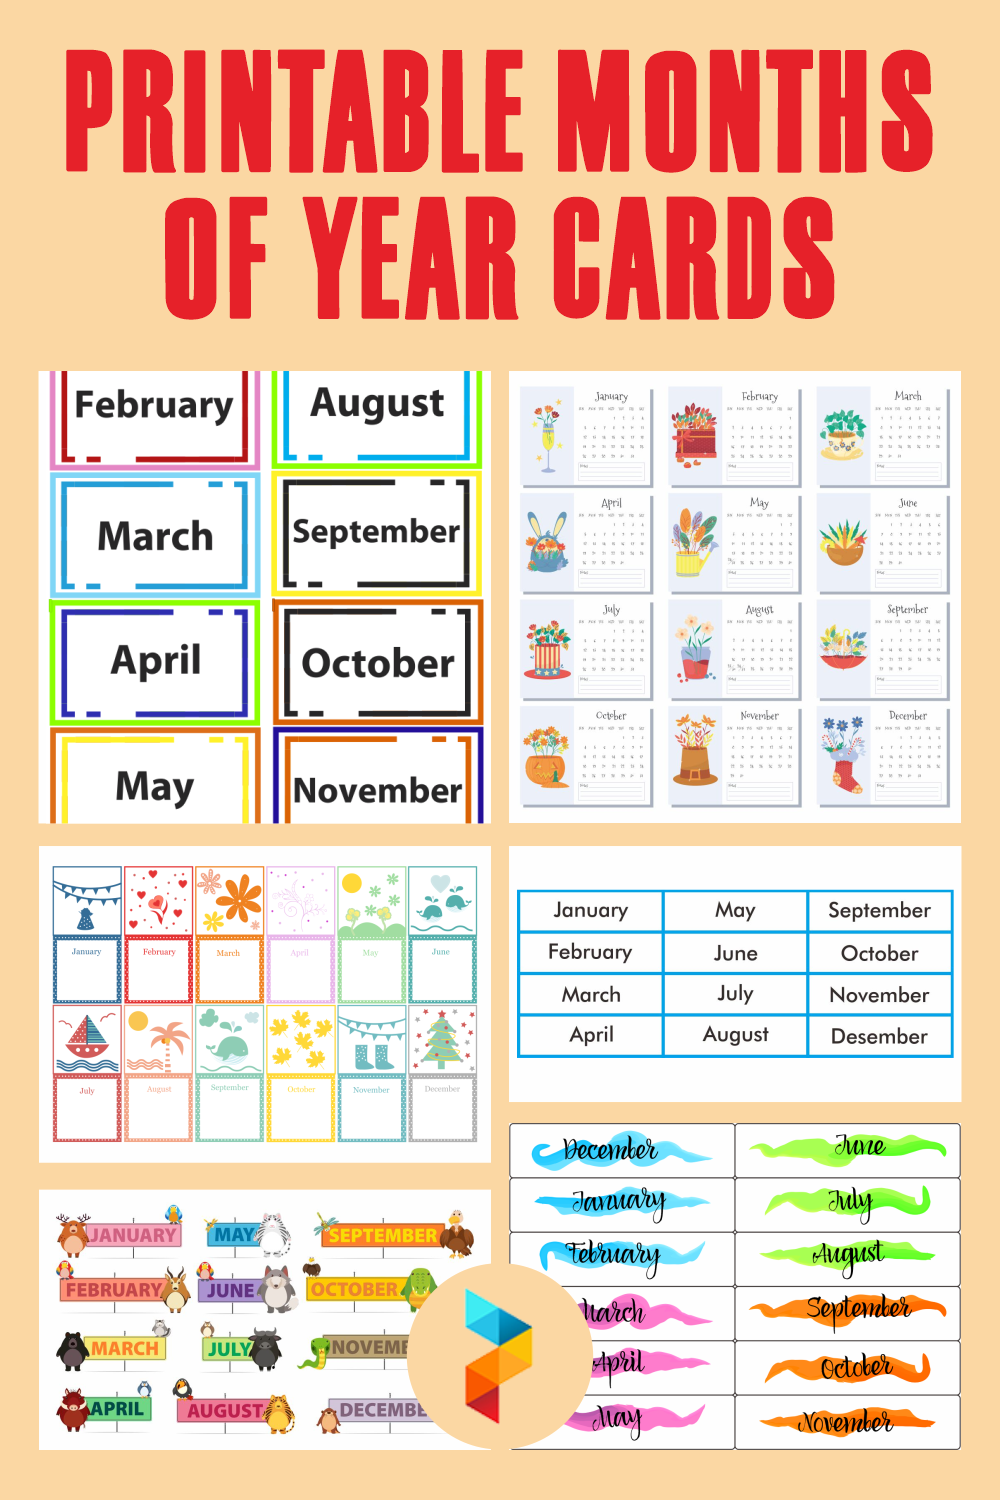 10 Best Printable Months Of Year Cards